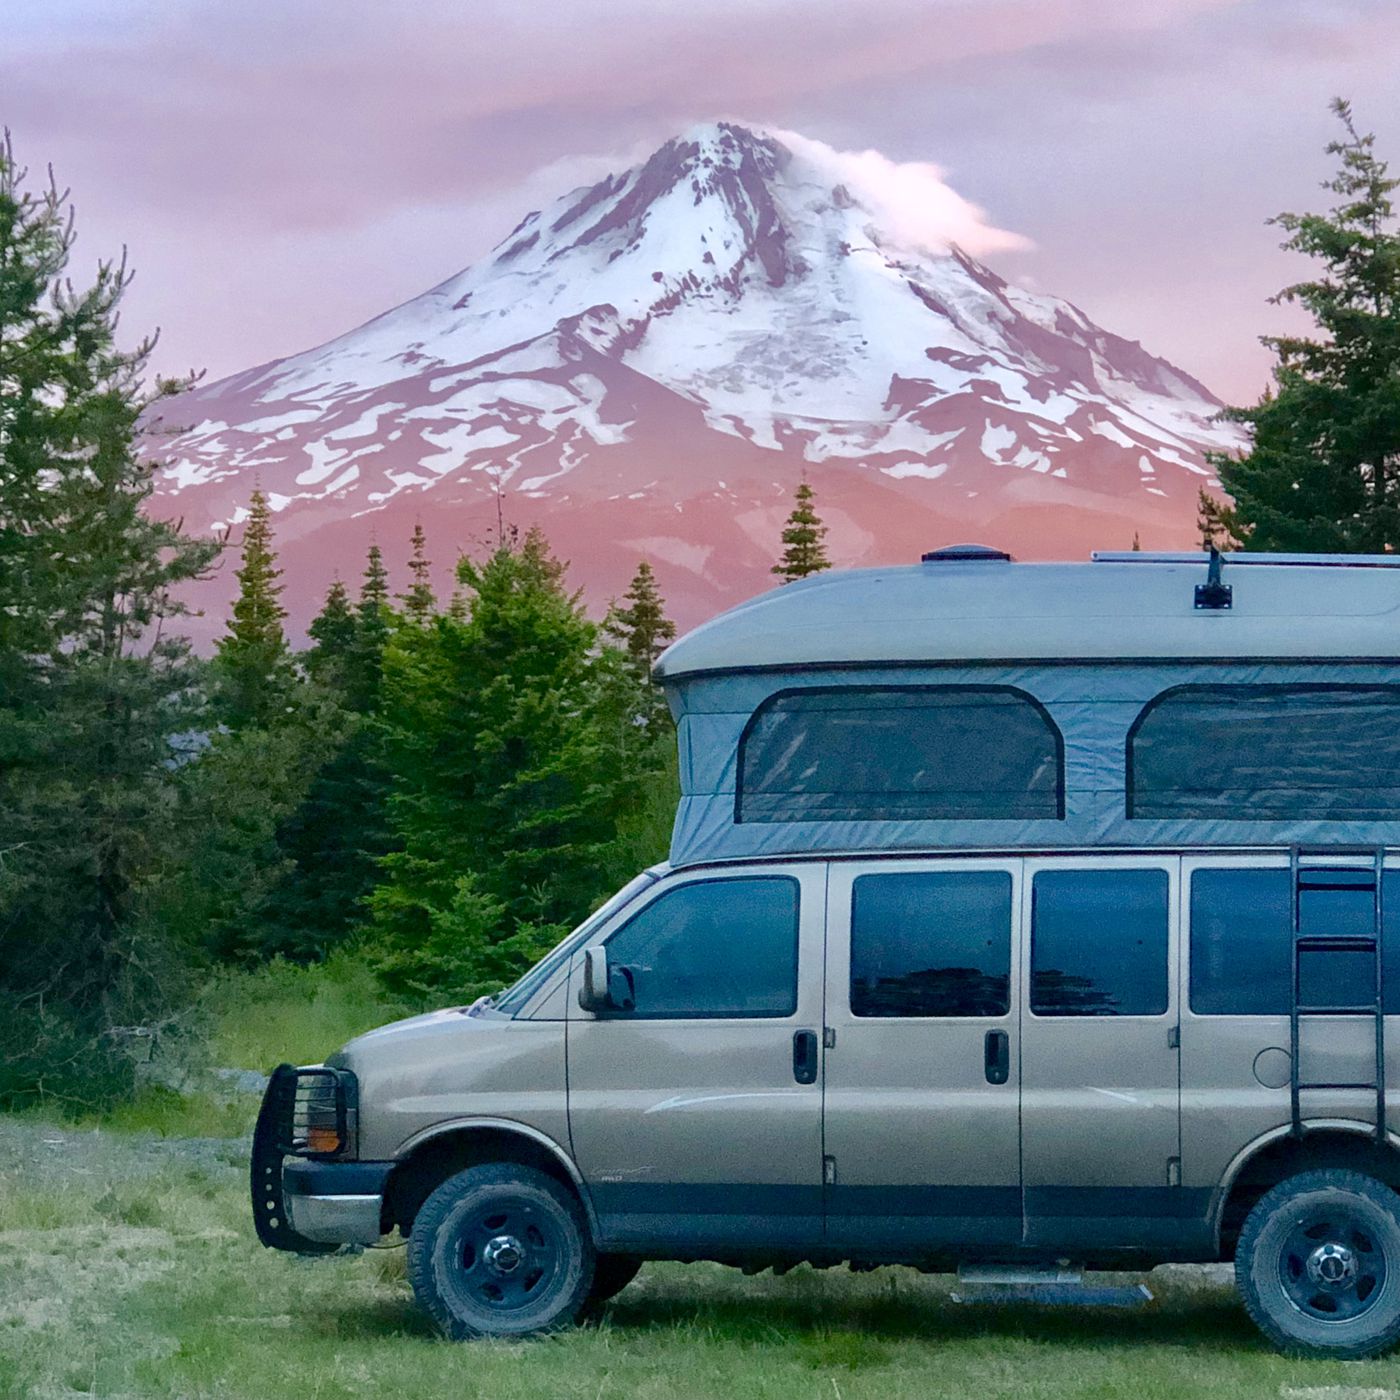 Can You Find a Good RV For Sale on Craigslist?